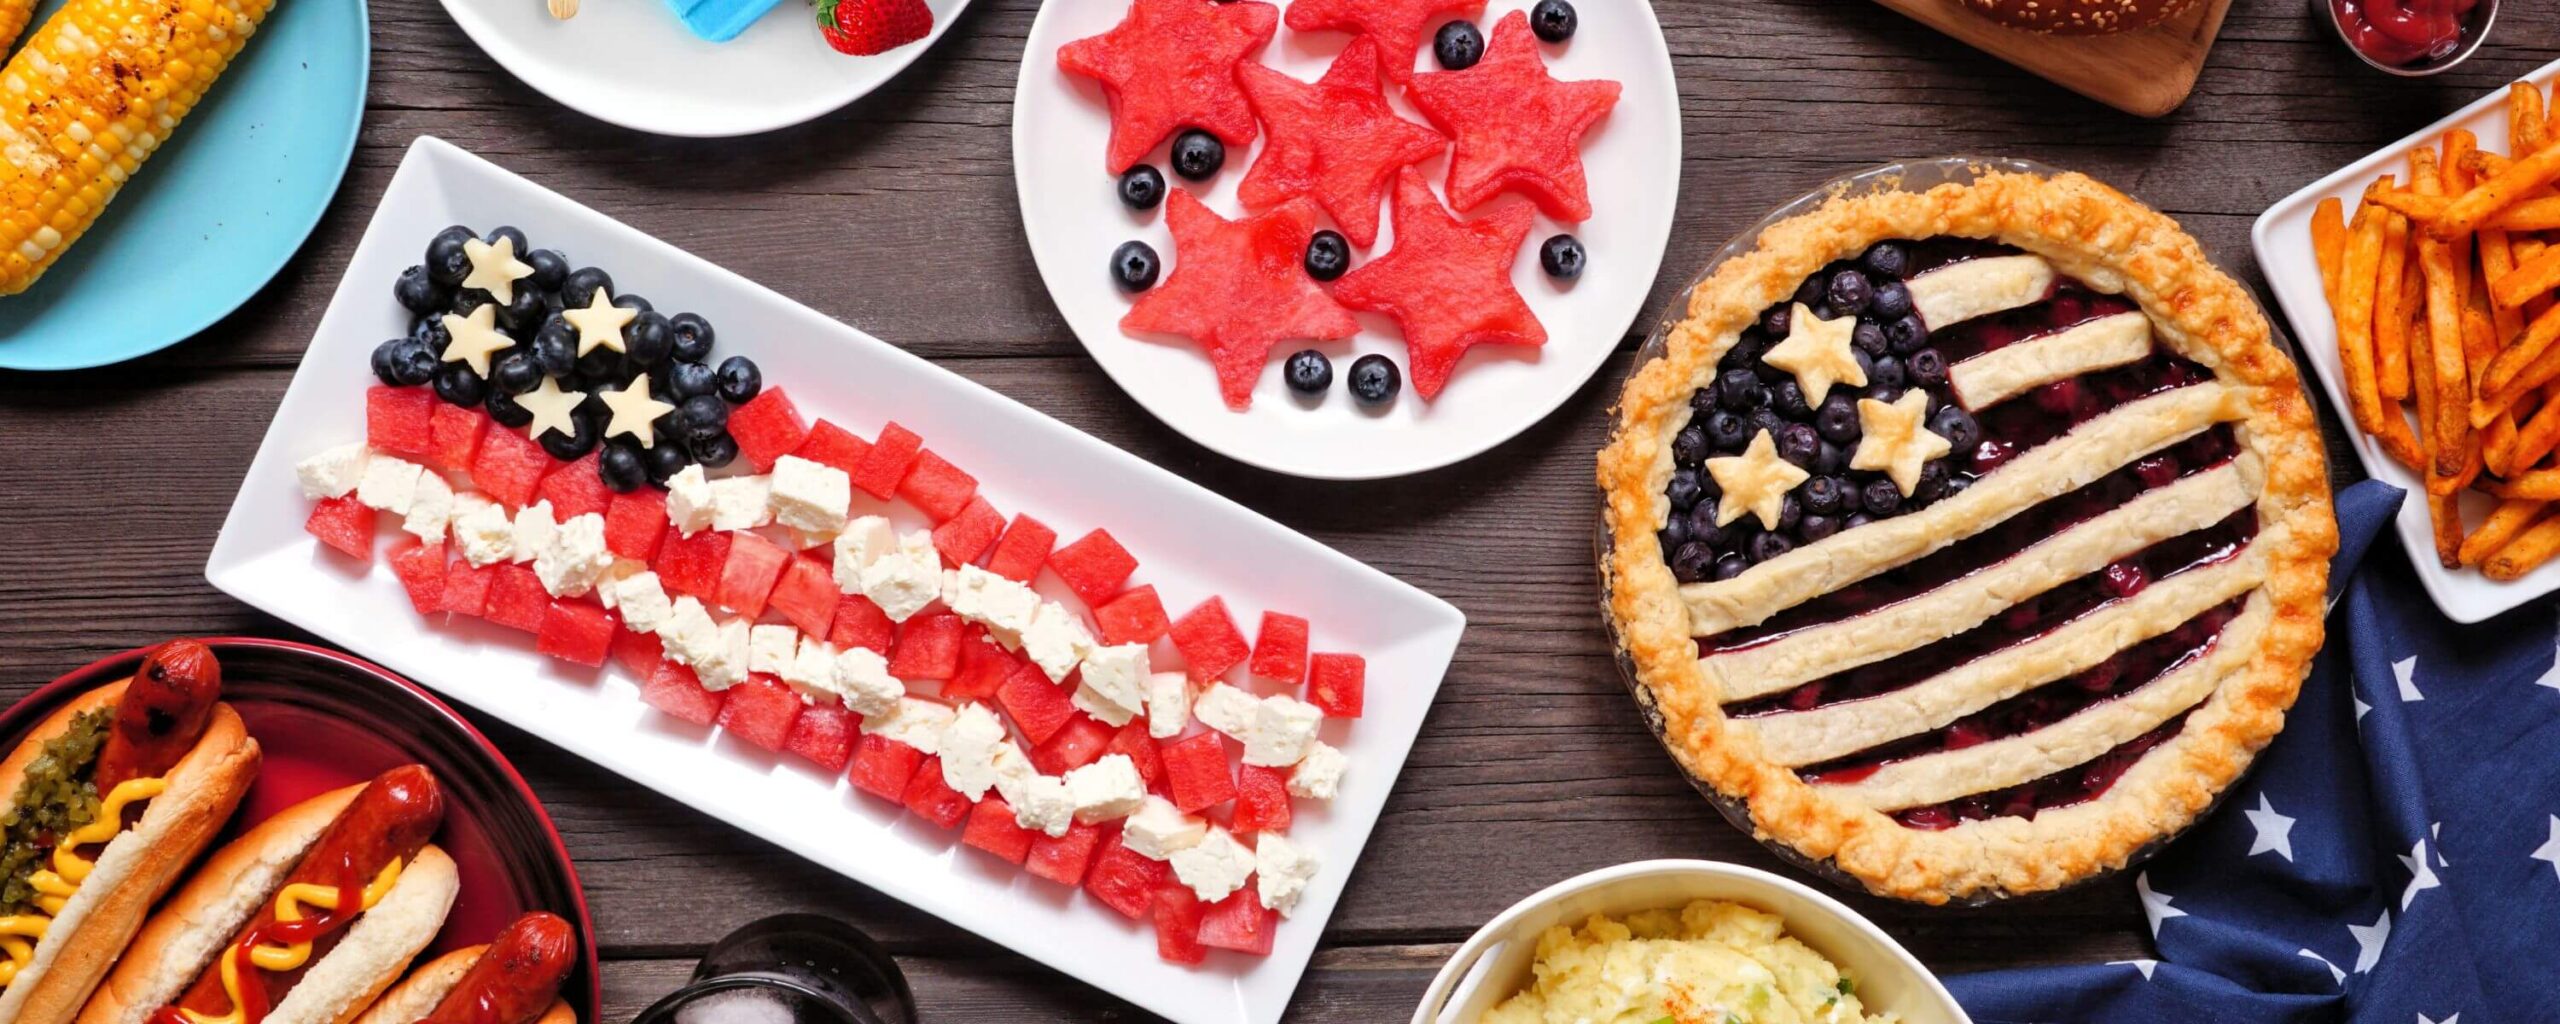 Fourth of July celebration with food that is presented like the American flag